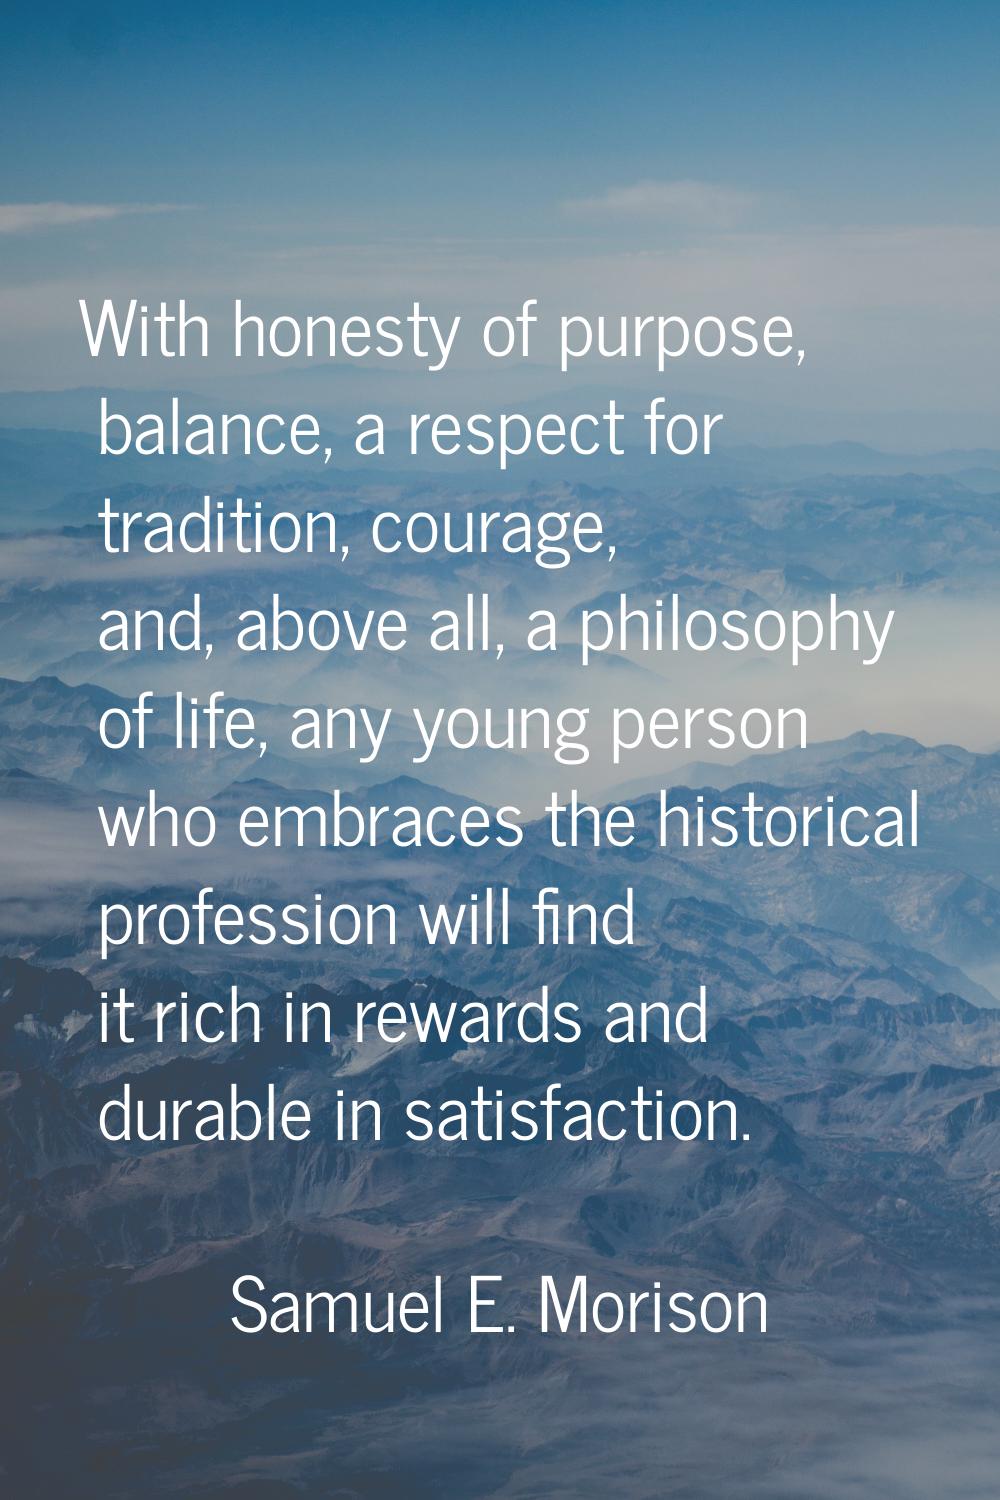 With honesty of purpose, balance, a respect for tradition, courage, and, above all, a philosophy of